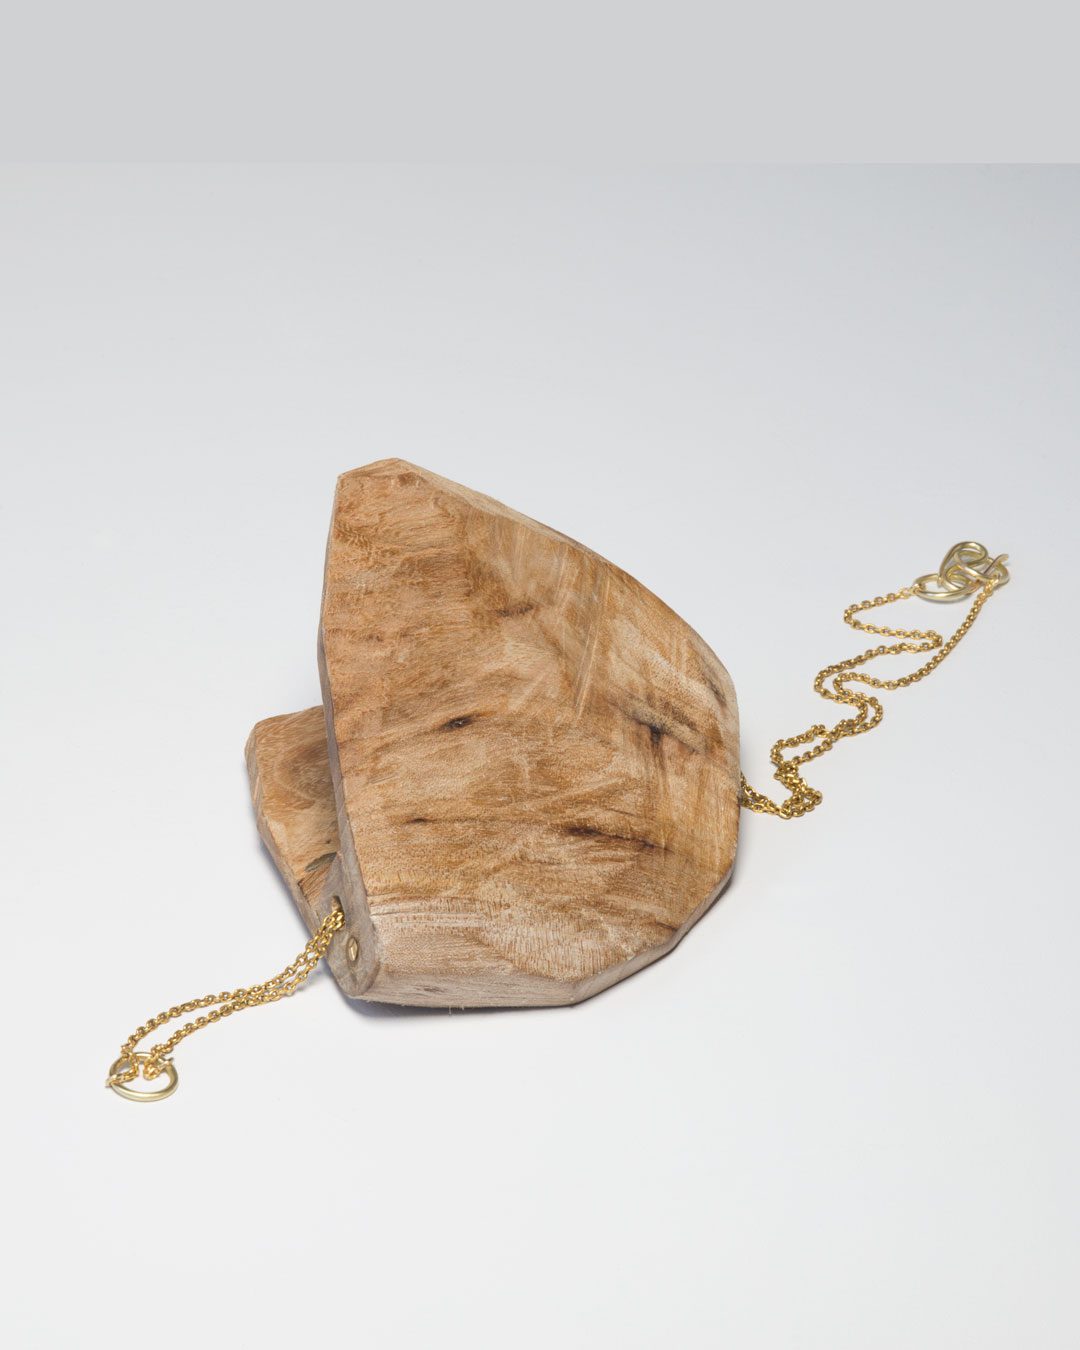 Dorothea Prühl, necklace, Moth (Motte), 2017, elm wood and gold, length of the form: 120 mm, price on request